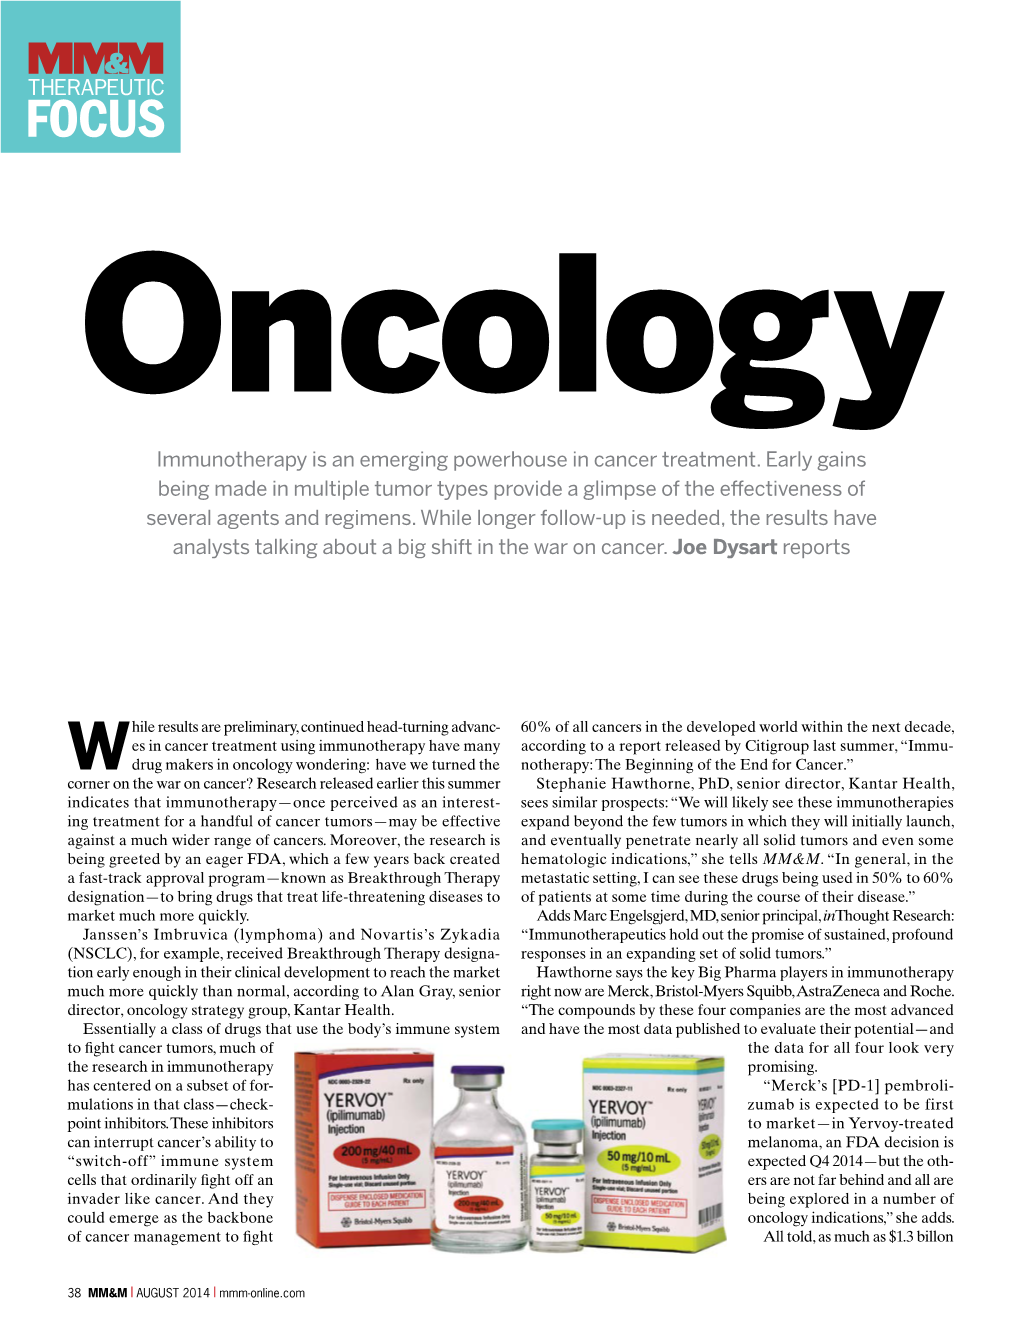 THERAPEUTIC FOCUS Oncology Immunotherapy Is an Emerging Powerhouse in Cancer Treatment